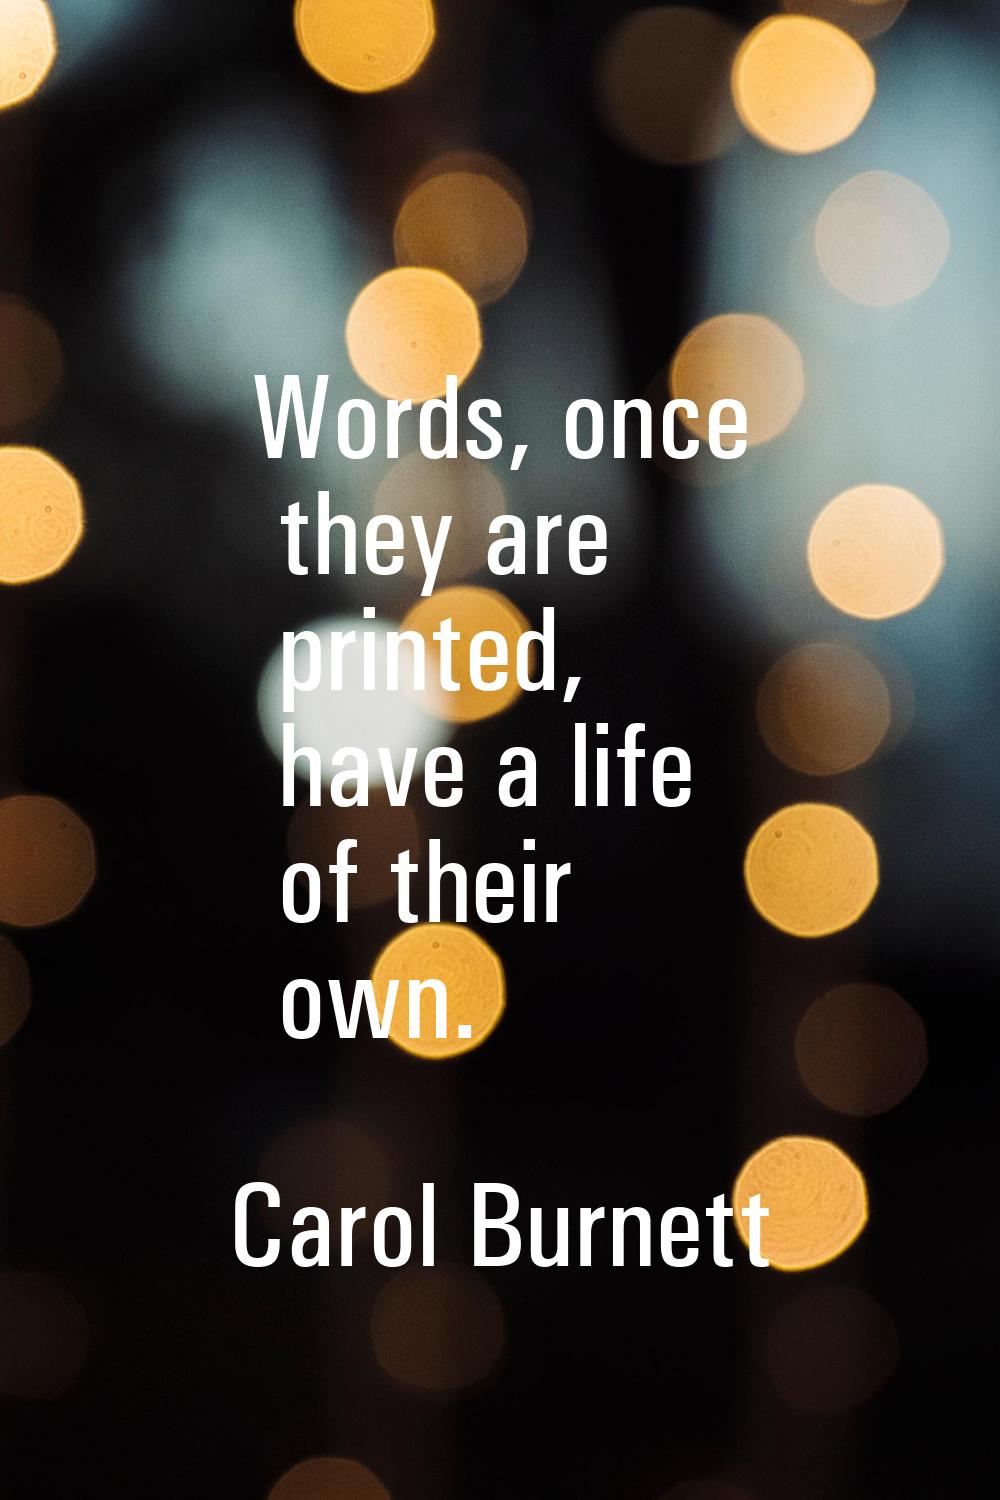 Words, once they are printed, have a life of their own.